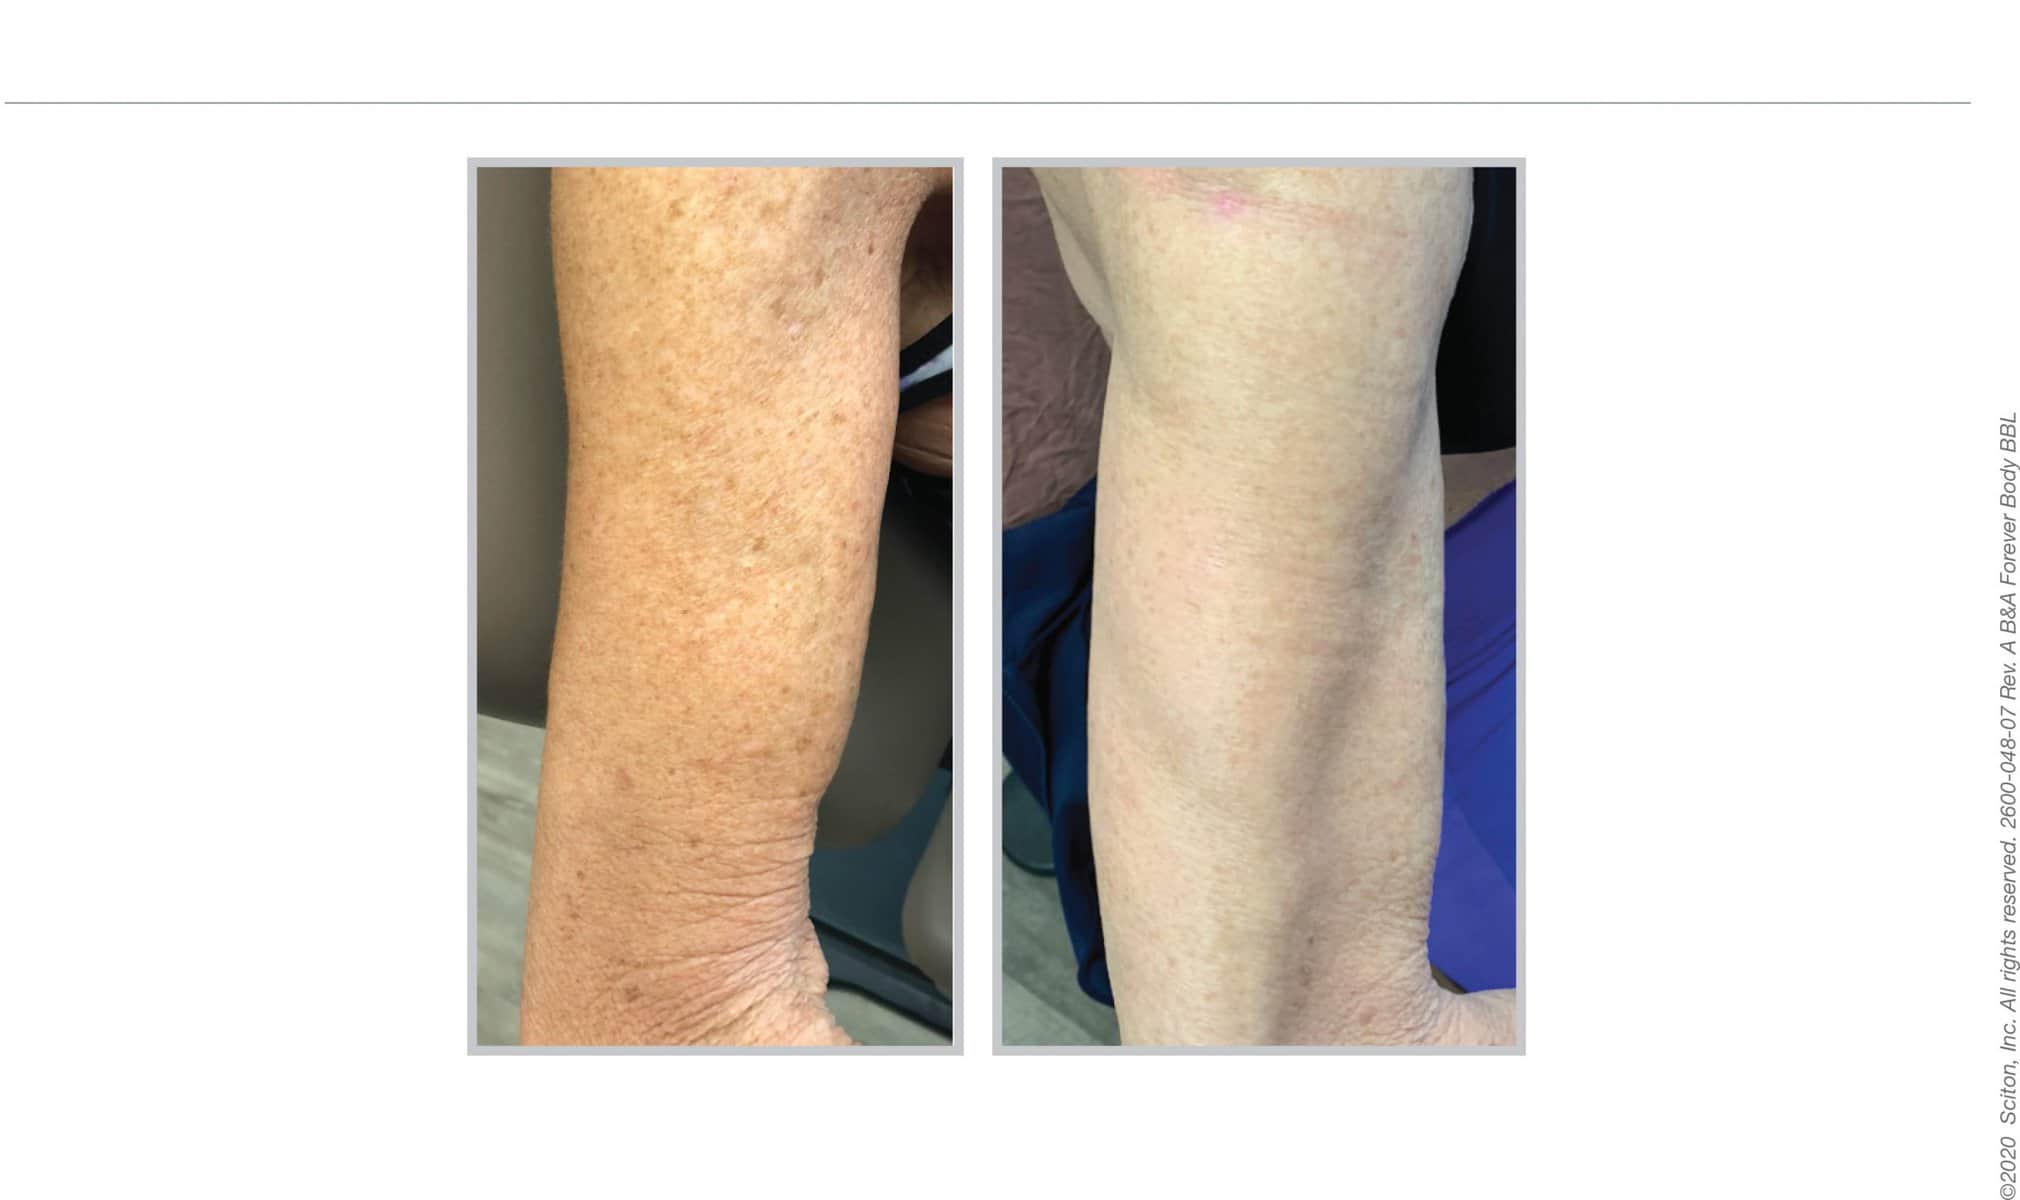 BBL Hero treatment on legs 12, before and after